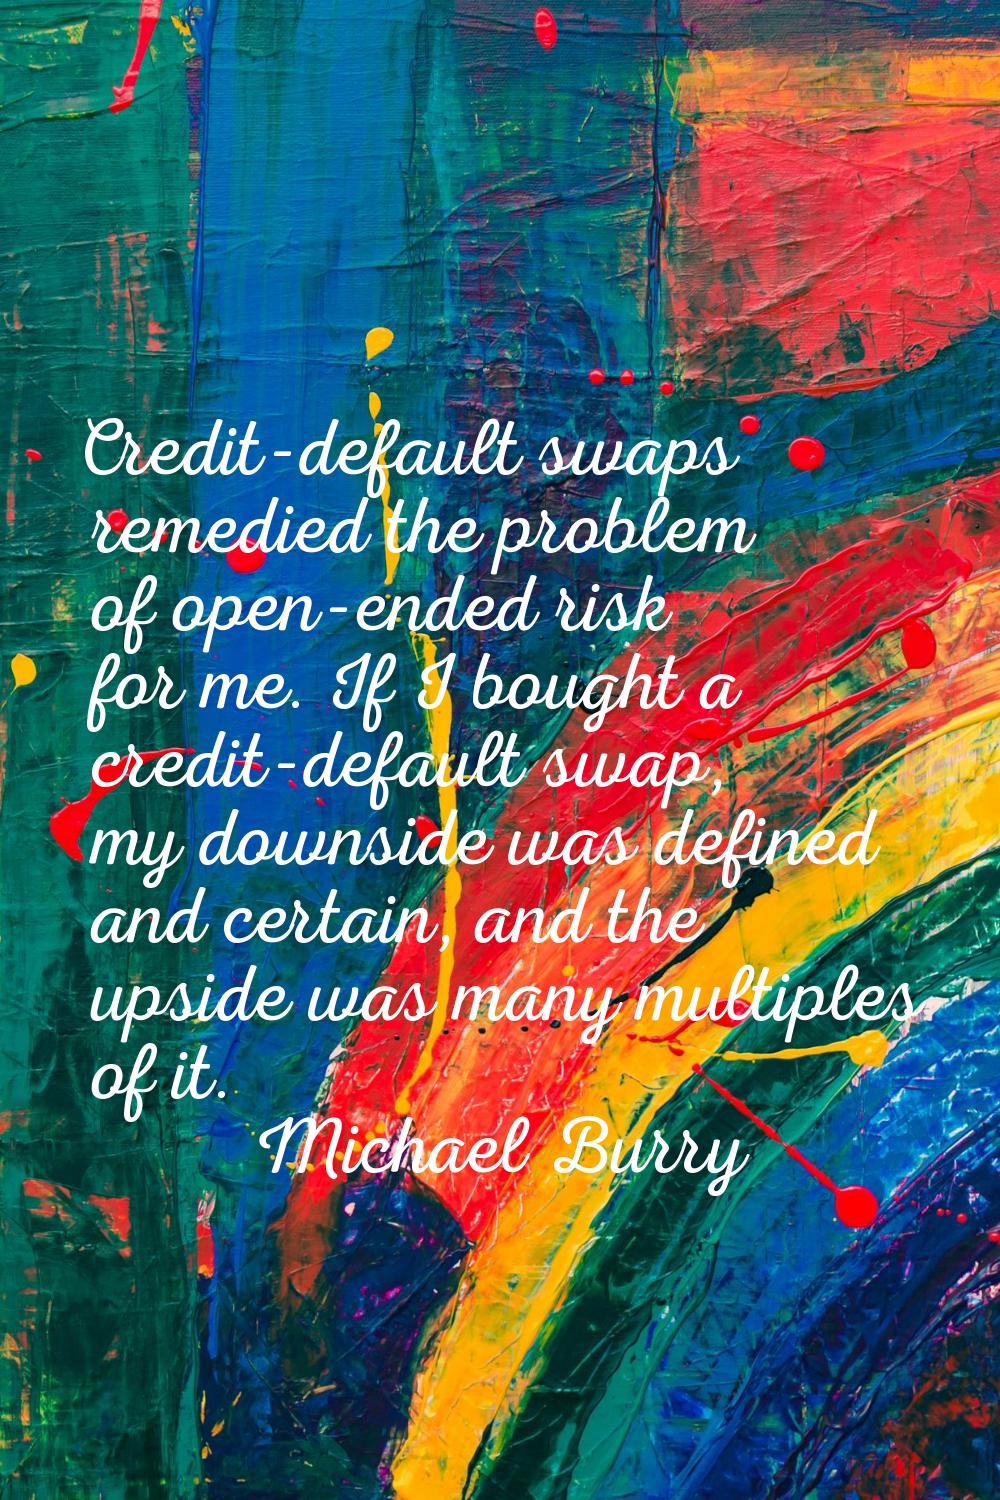 Credit-default swaps remedied the problem of open-ended risk for me. If I bought a credit-default s